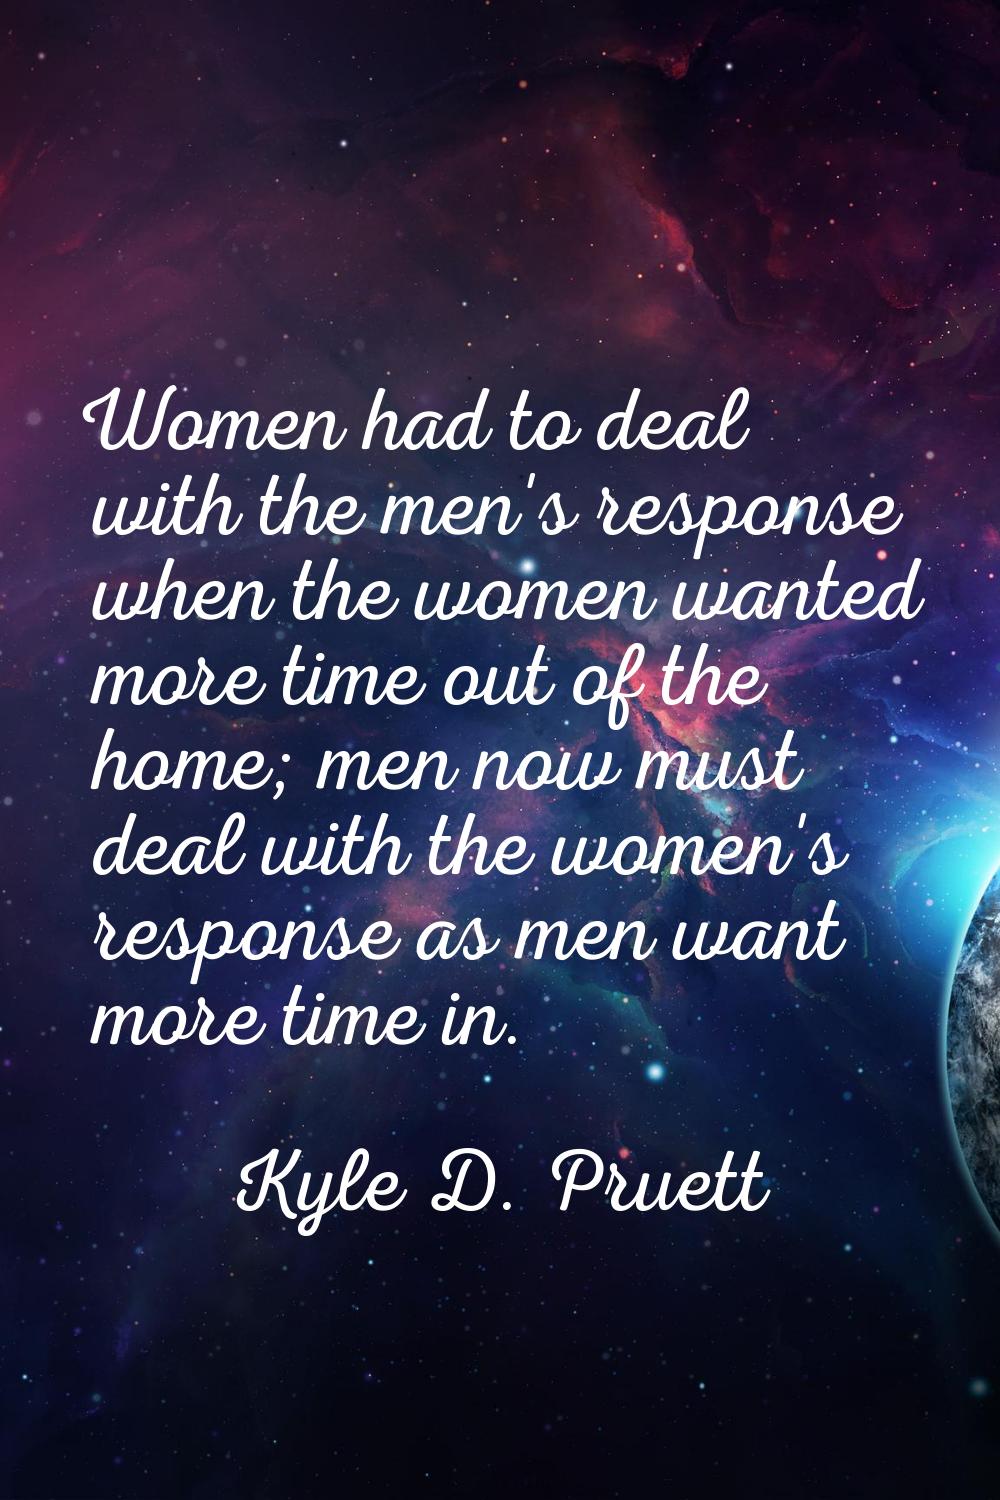 Women had to deal with the men's response when the women wanted more time out of the home; men now 